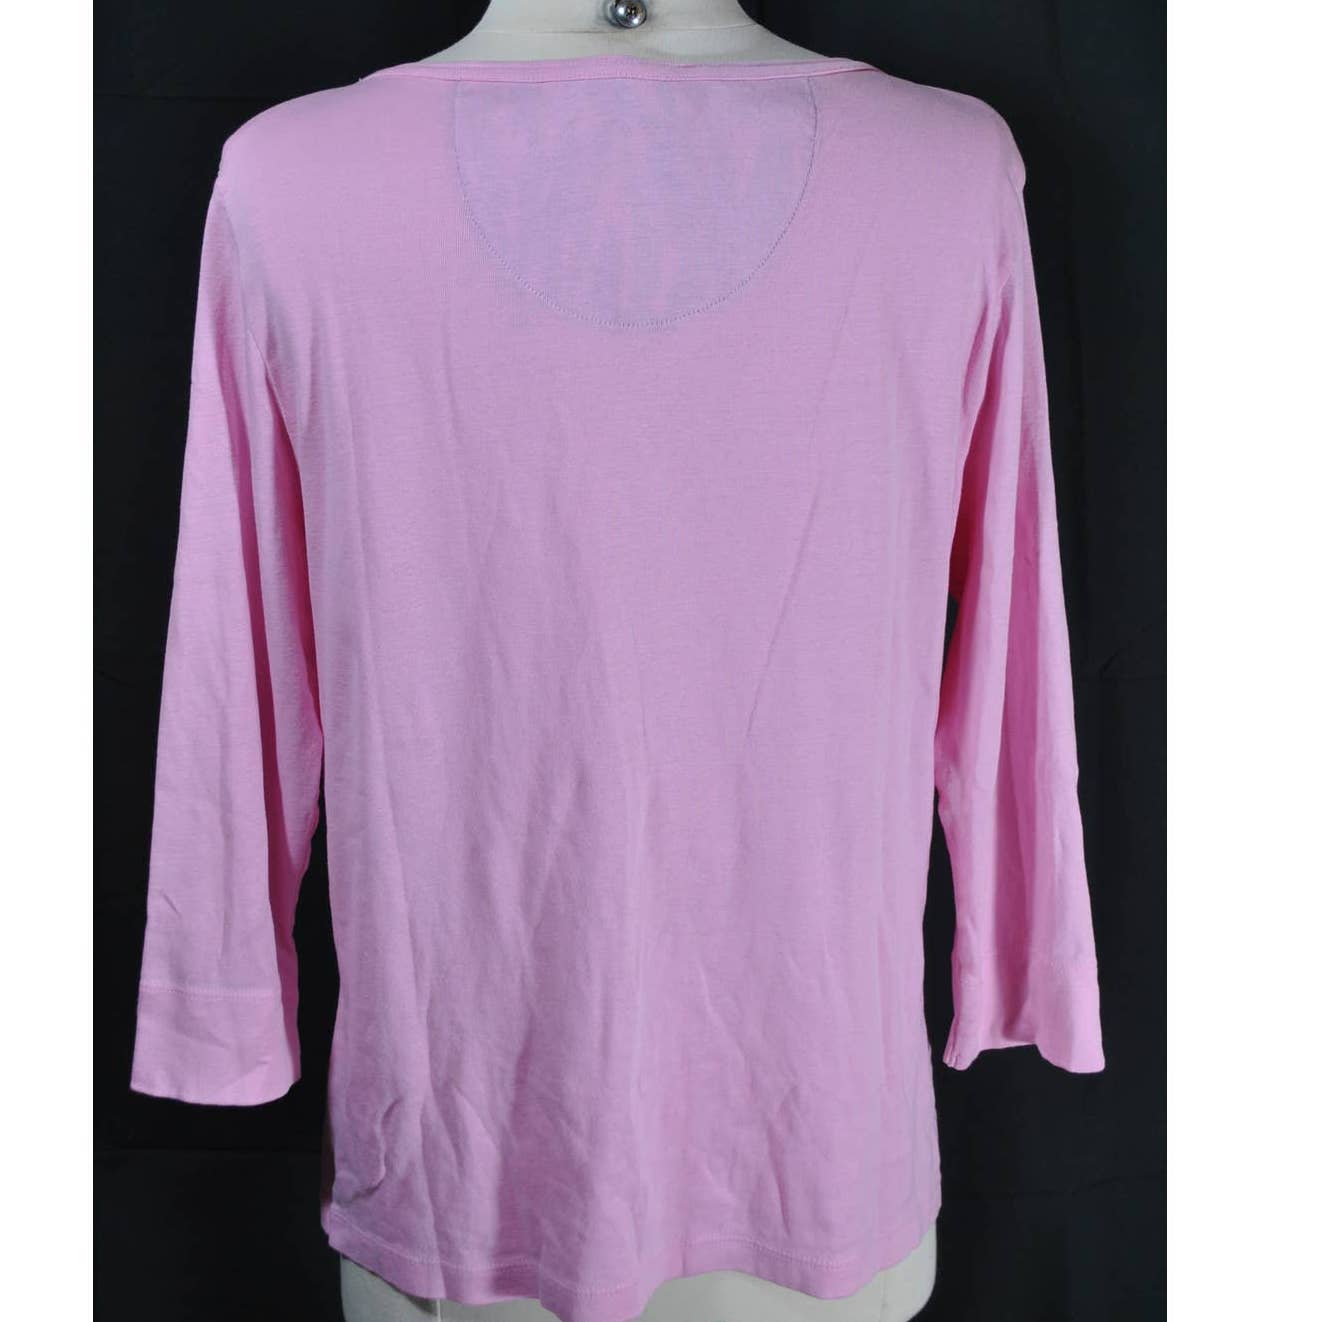 Lilly Pulitzer Pink 3/4 Sleeve Top - XL